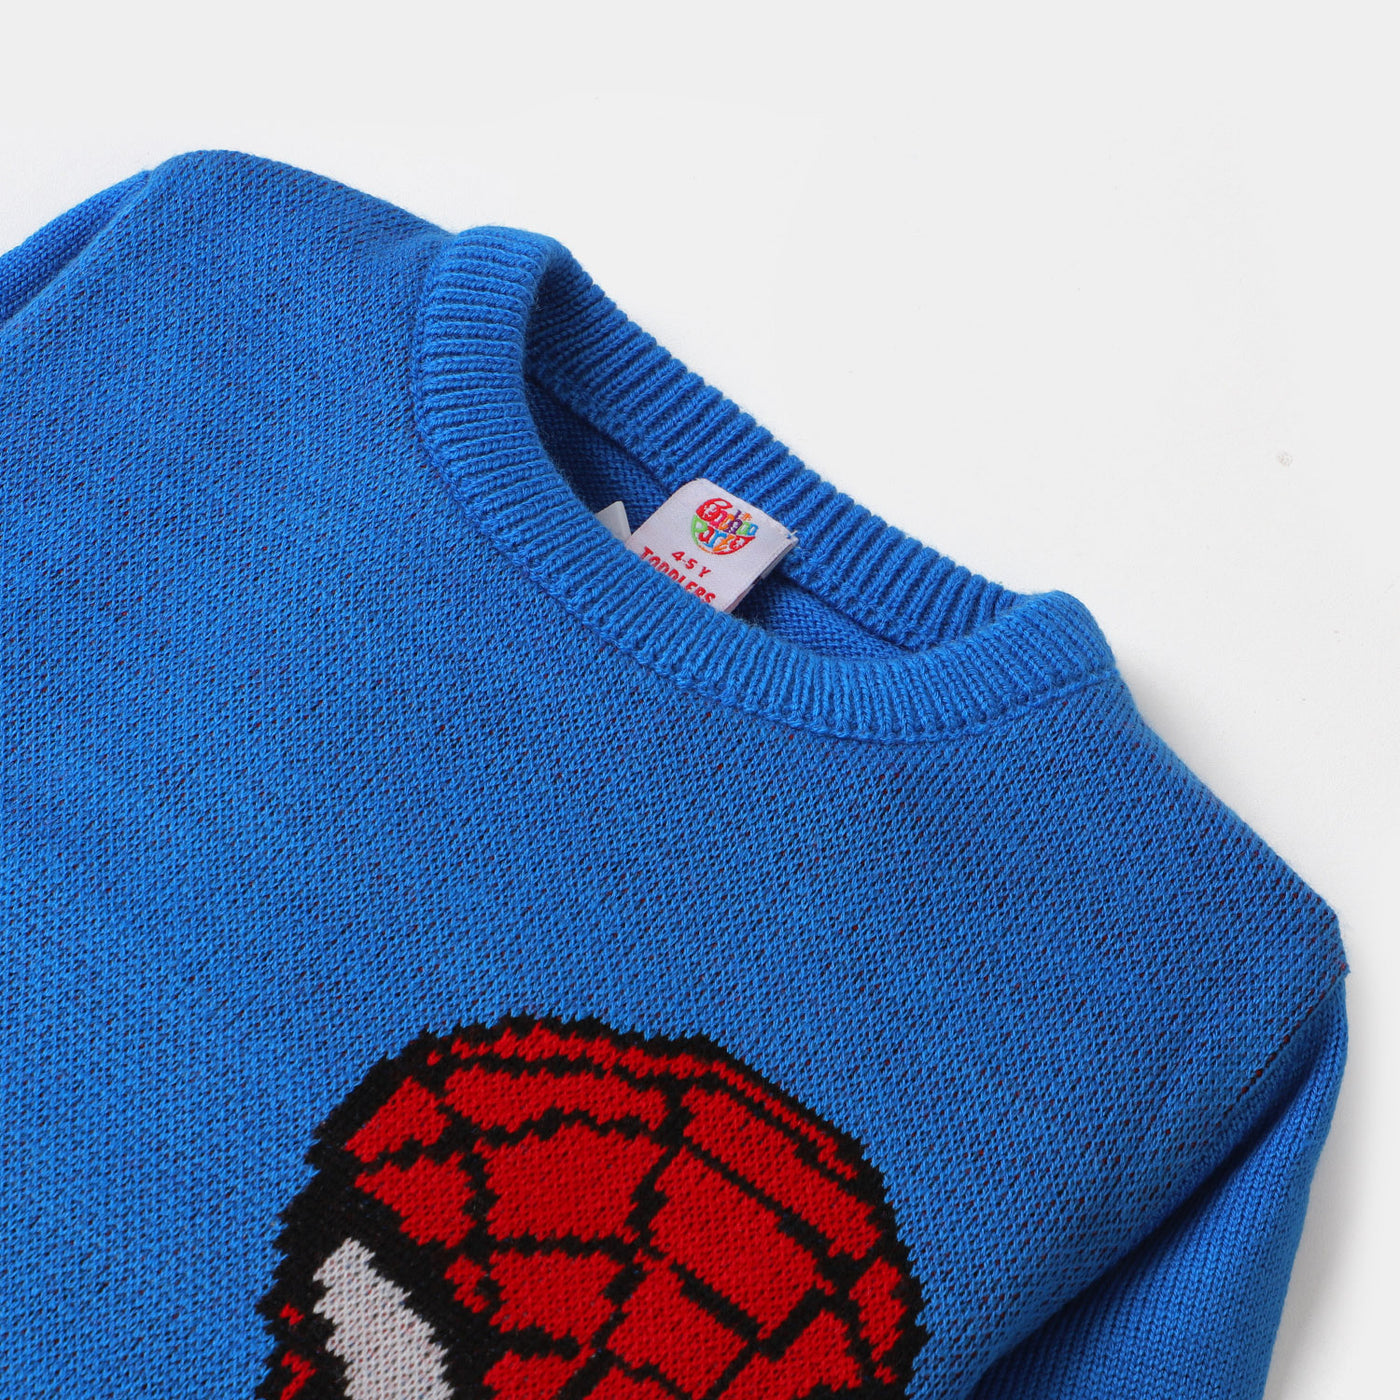 Boys Sweater Action Hero Character - Blue